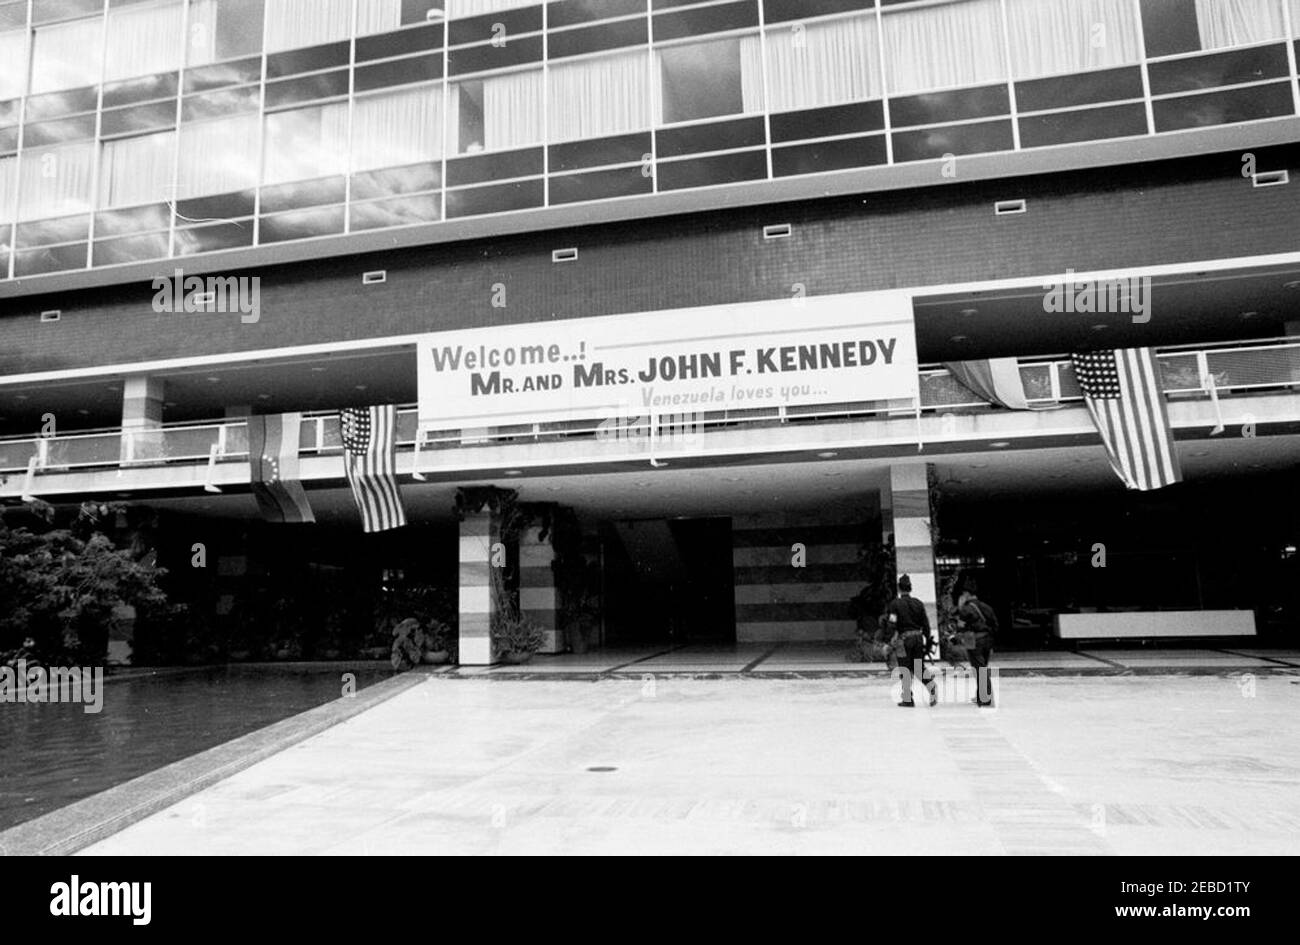 Trip to South America: Caracas, Venezuela, arrival, 9:00AM. Sign at Maiquetu00eda International Airport in Caracas, Venezuela welcoming President John F. Kennedy and First Lady Jacqueline Kennedy. Stock Photo